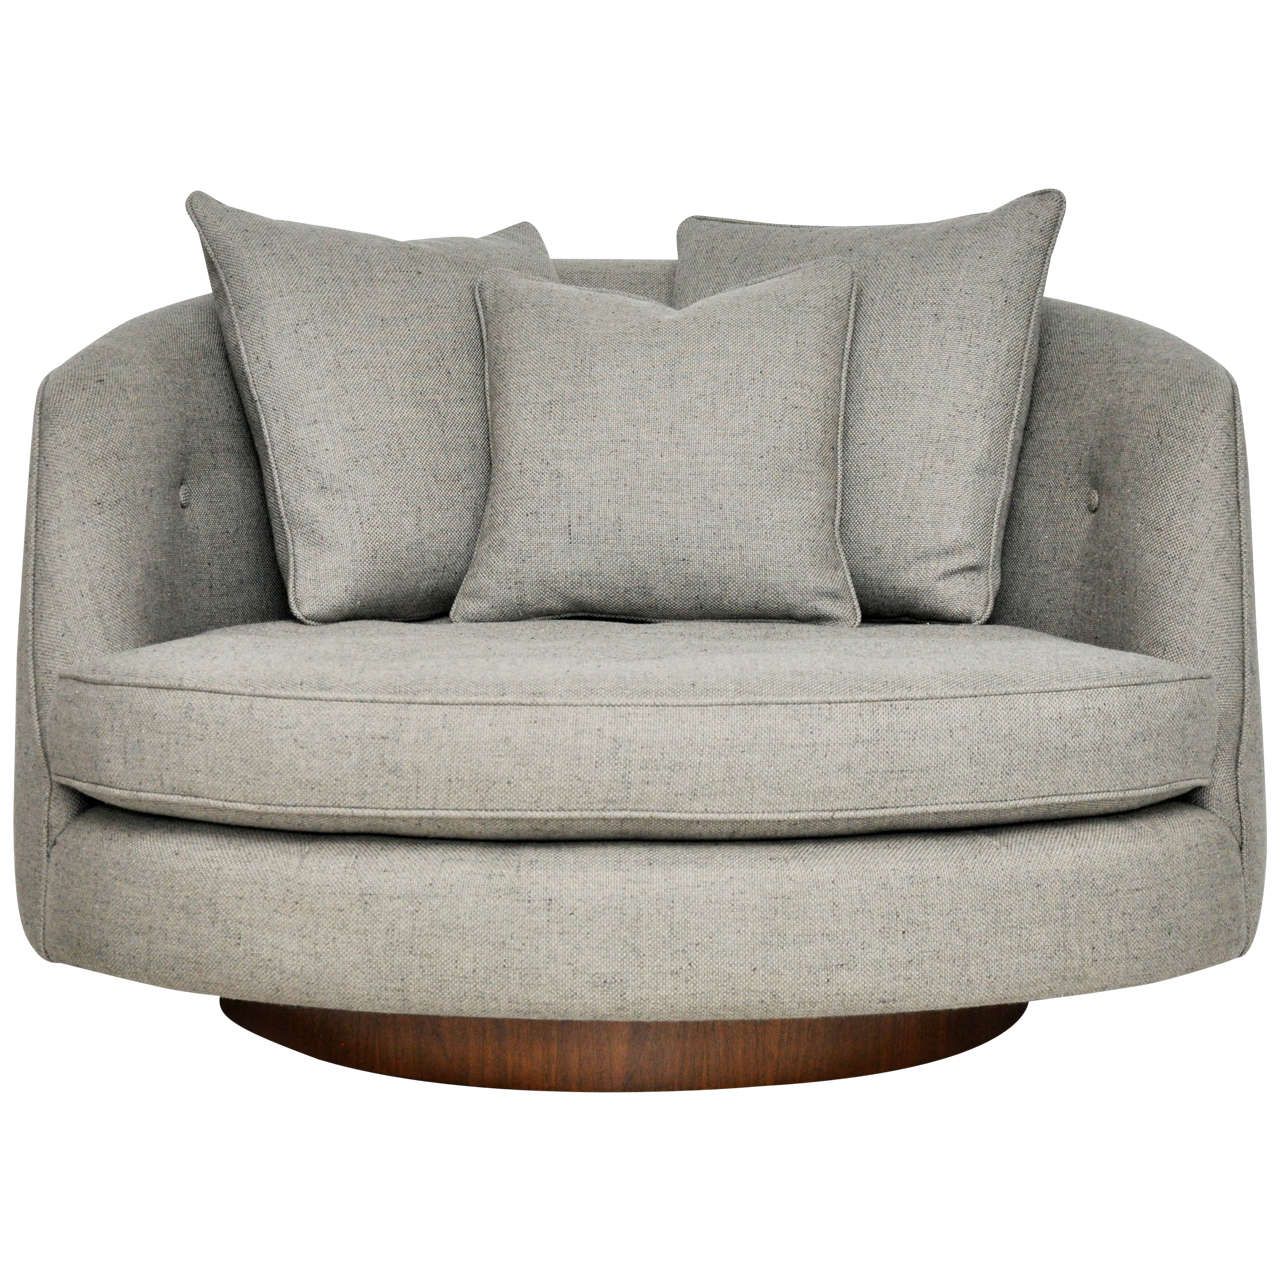 Milo Baughman Large Swivel Chair | From a unique collection of antique and  modern swivel chairs